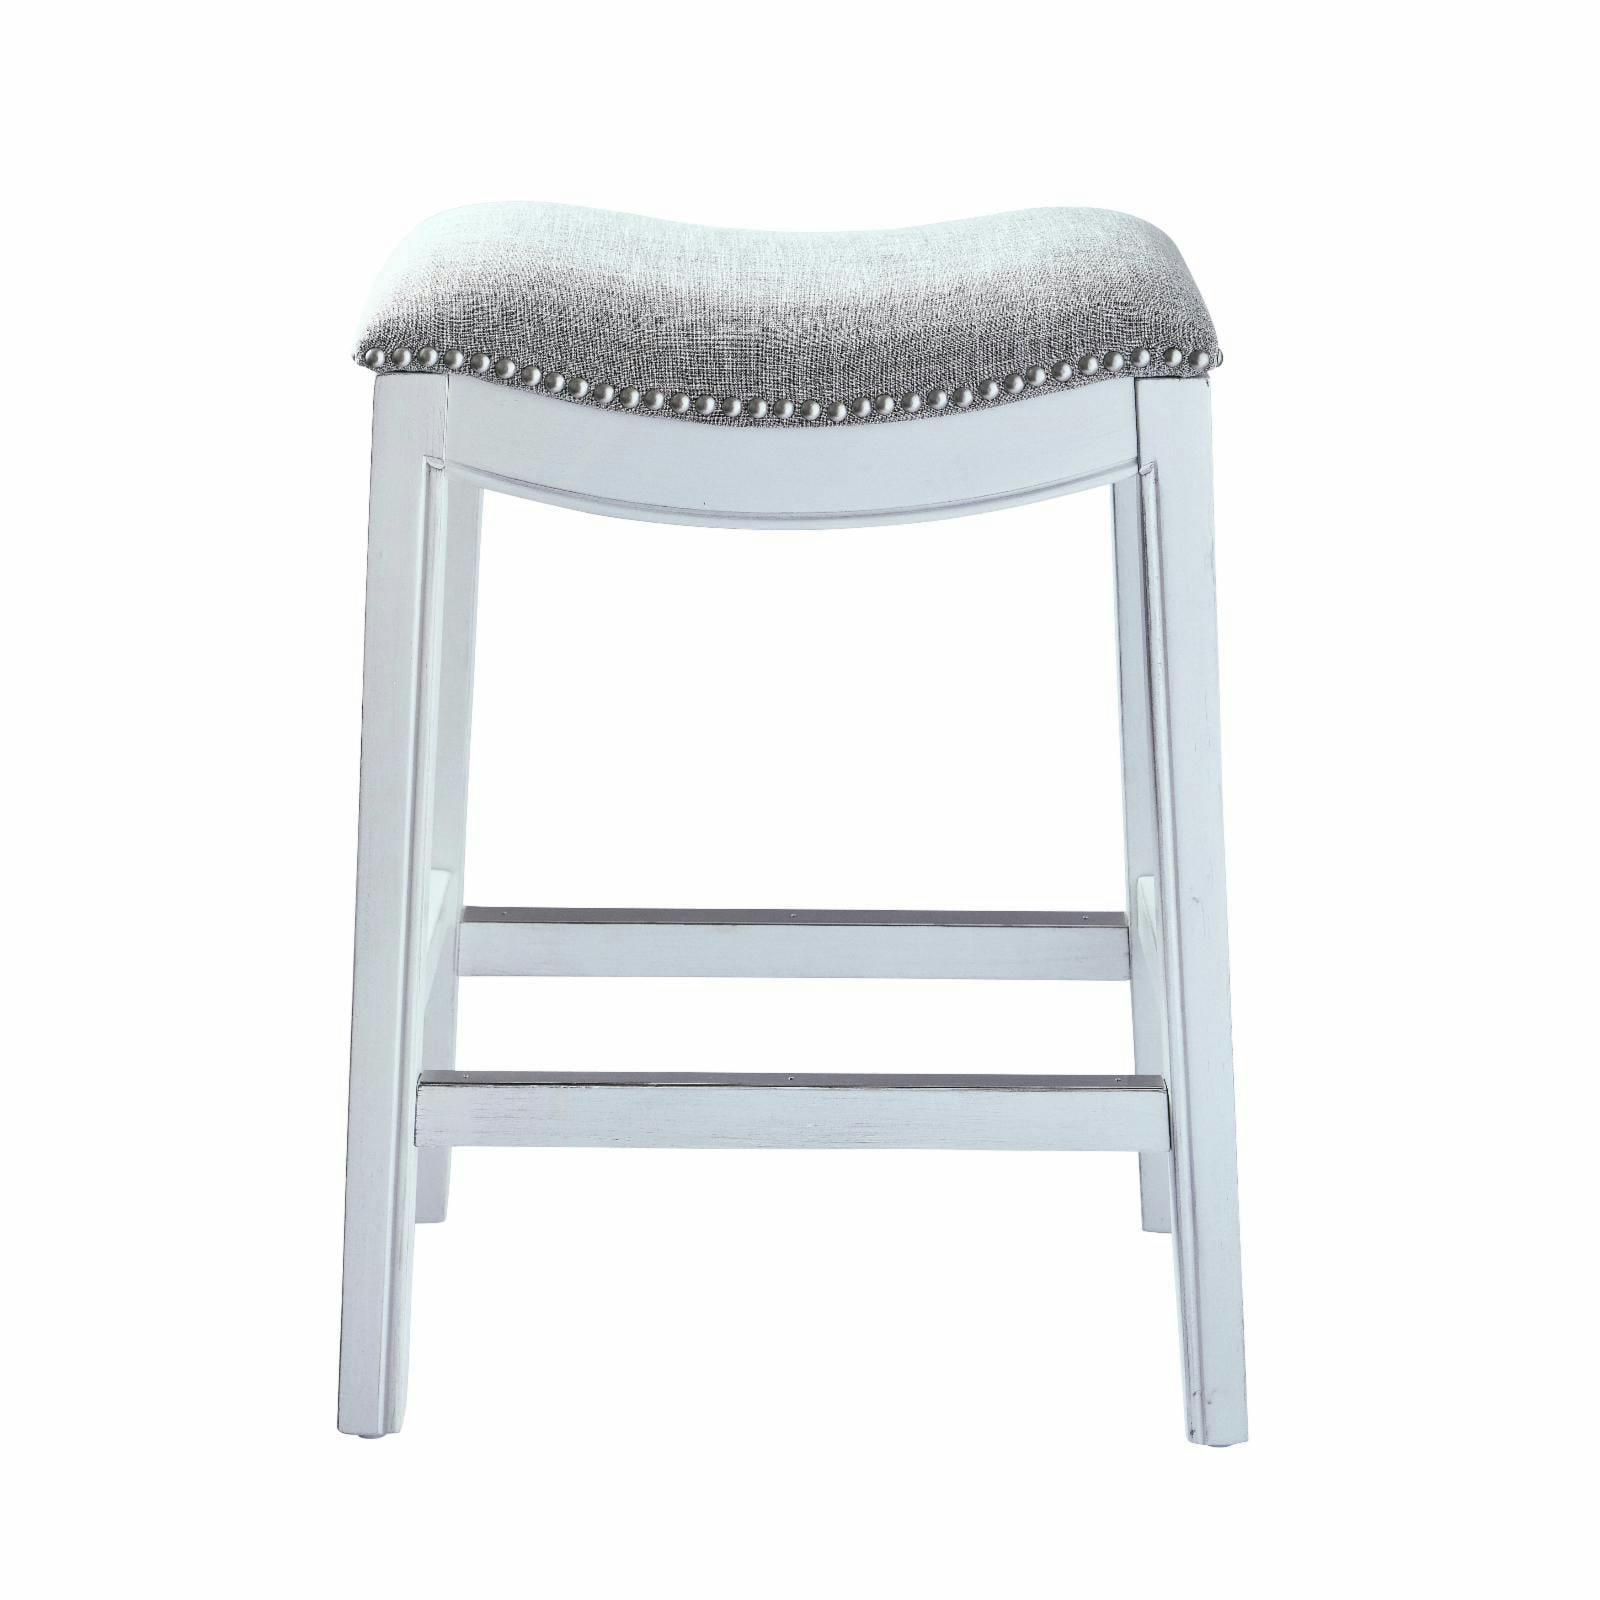 Zoey 31" White Wood Backless Saddle Barstool with Linen Seat